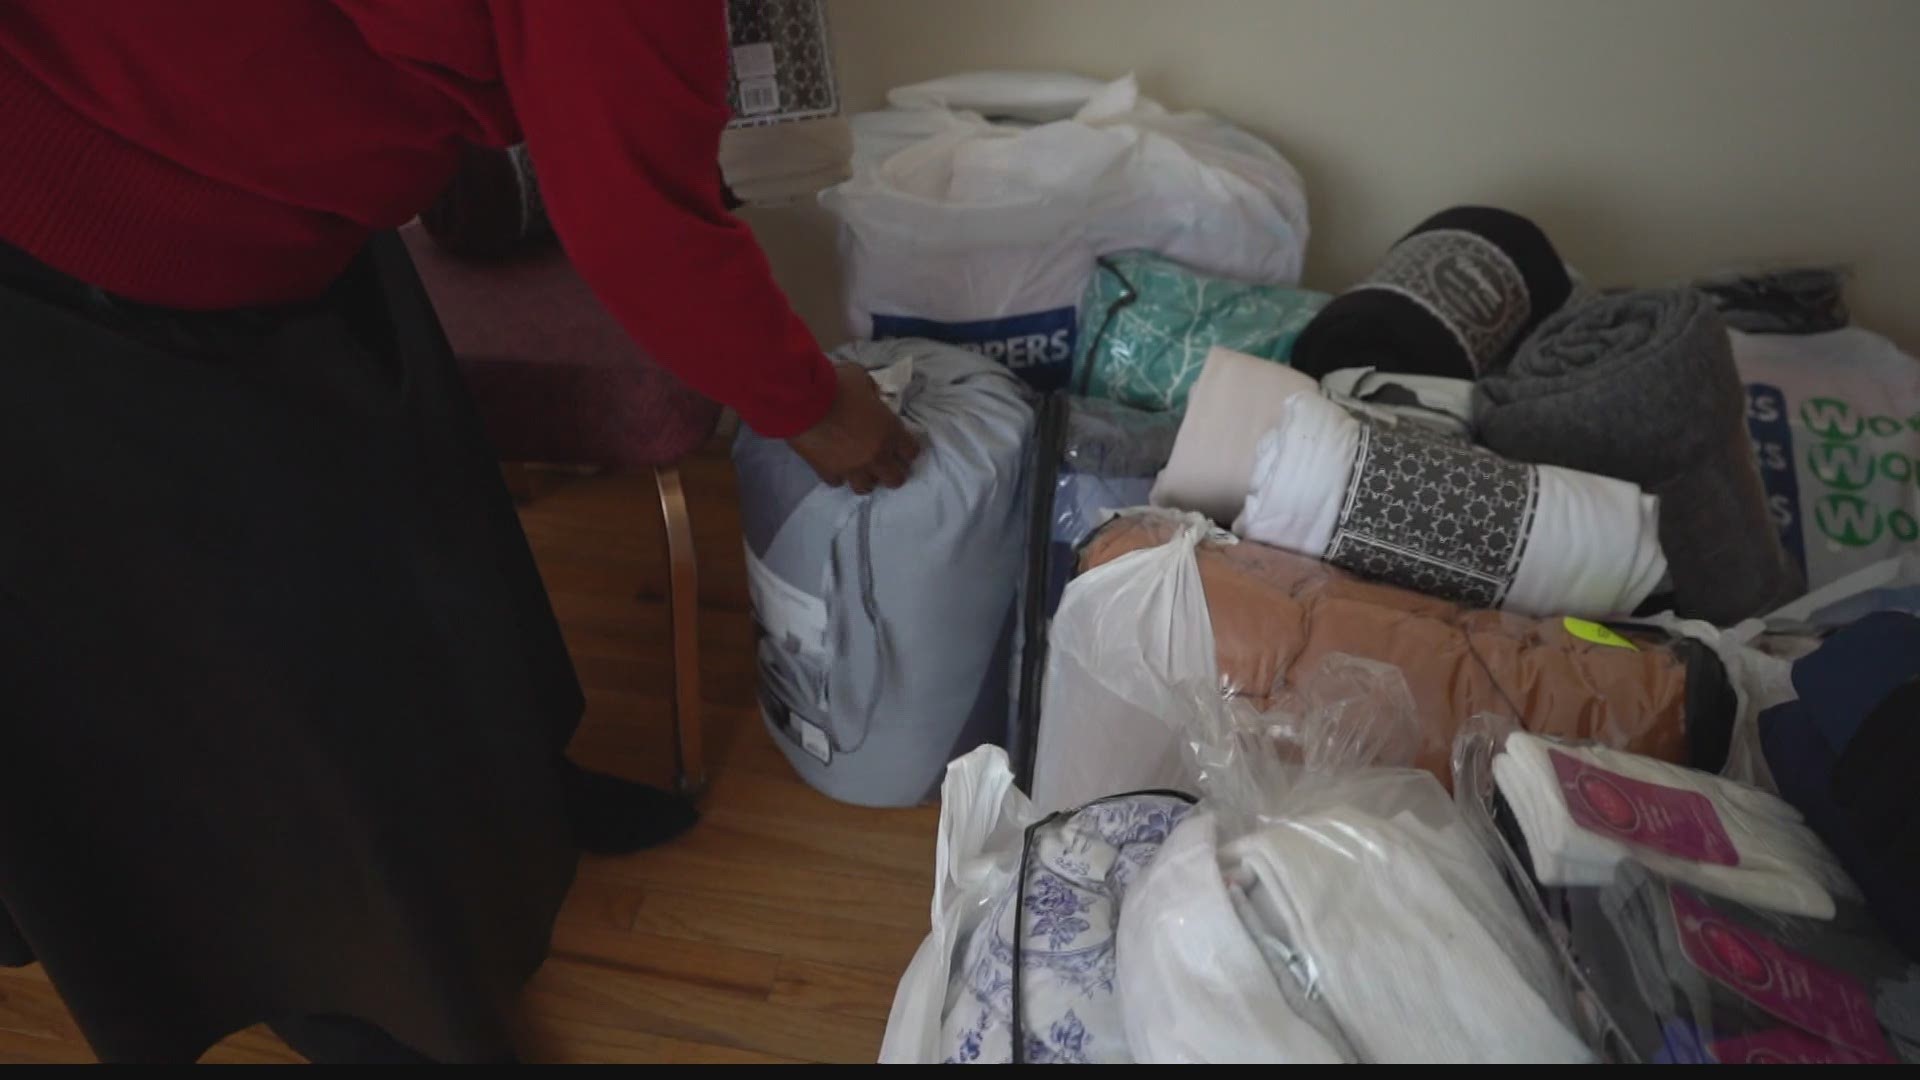 An Indianapolis pastor is hosting a blanket drive for Indy's homeless.